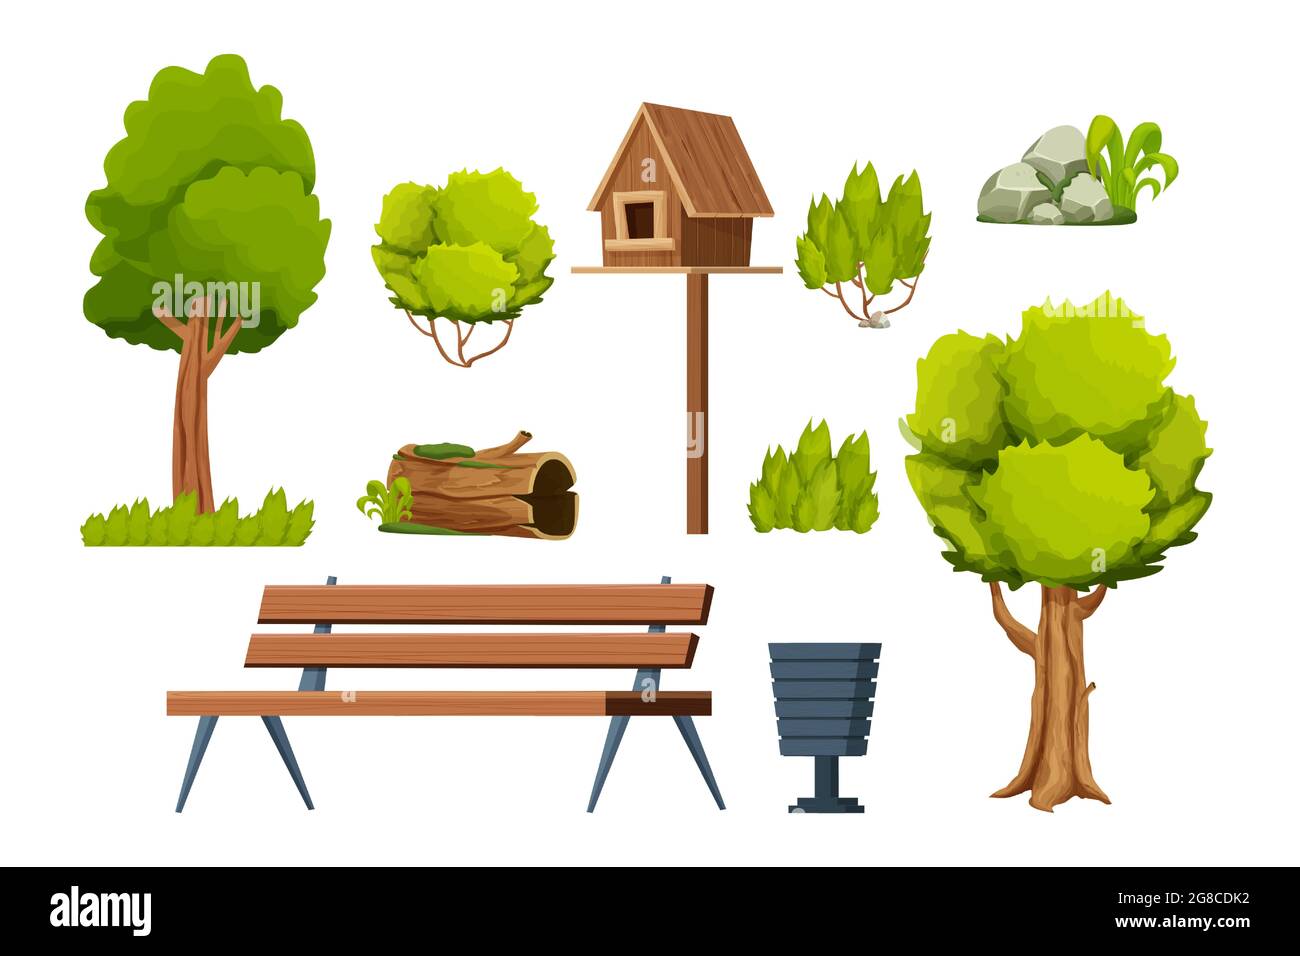 Park set of elements, wooden bench, trees, bush, stone with moss, old log, birdhouse, bin in cartoon style isolated on white background. Vector illustration Stock Vector